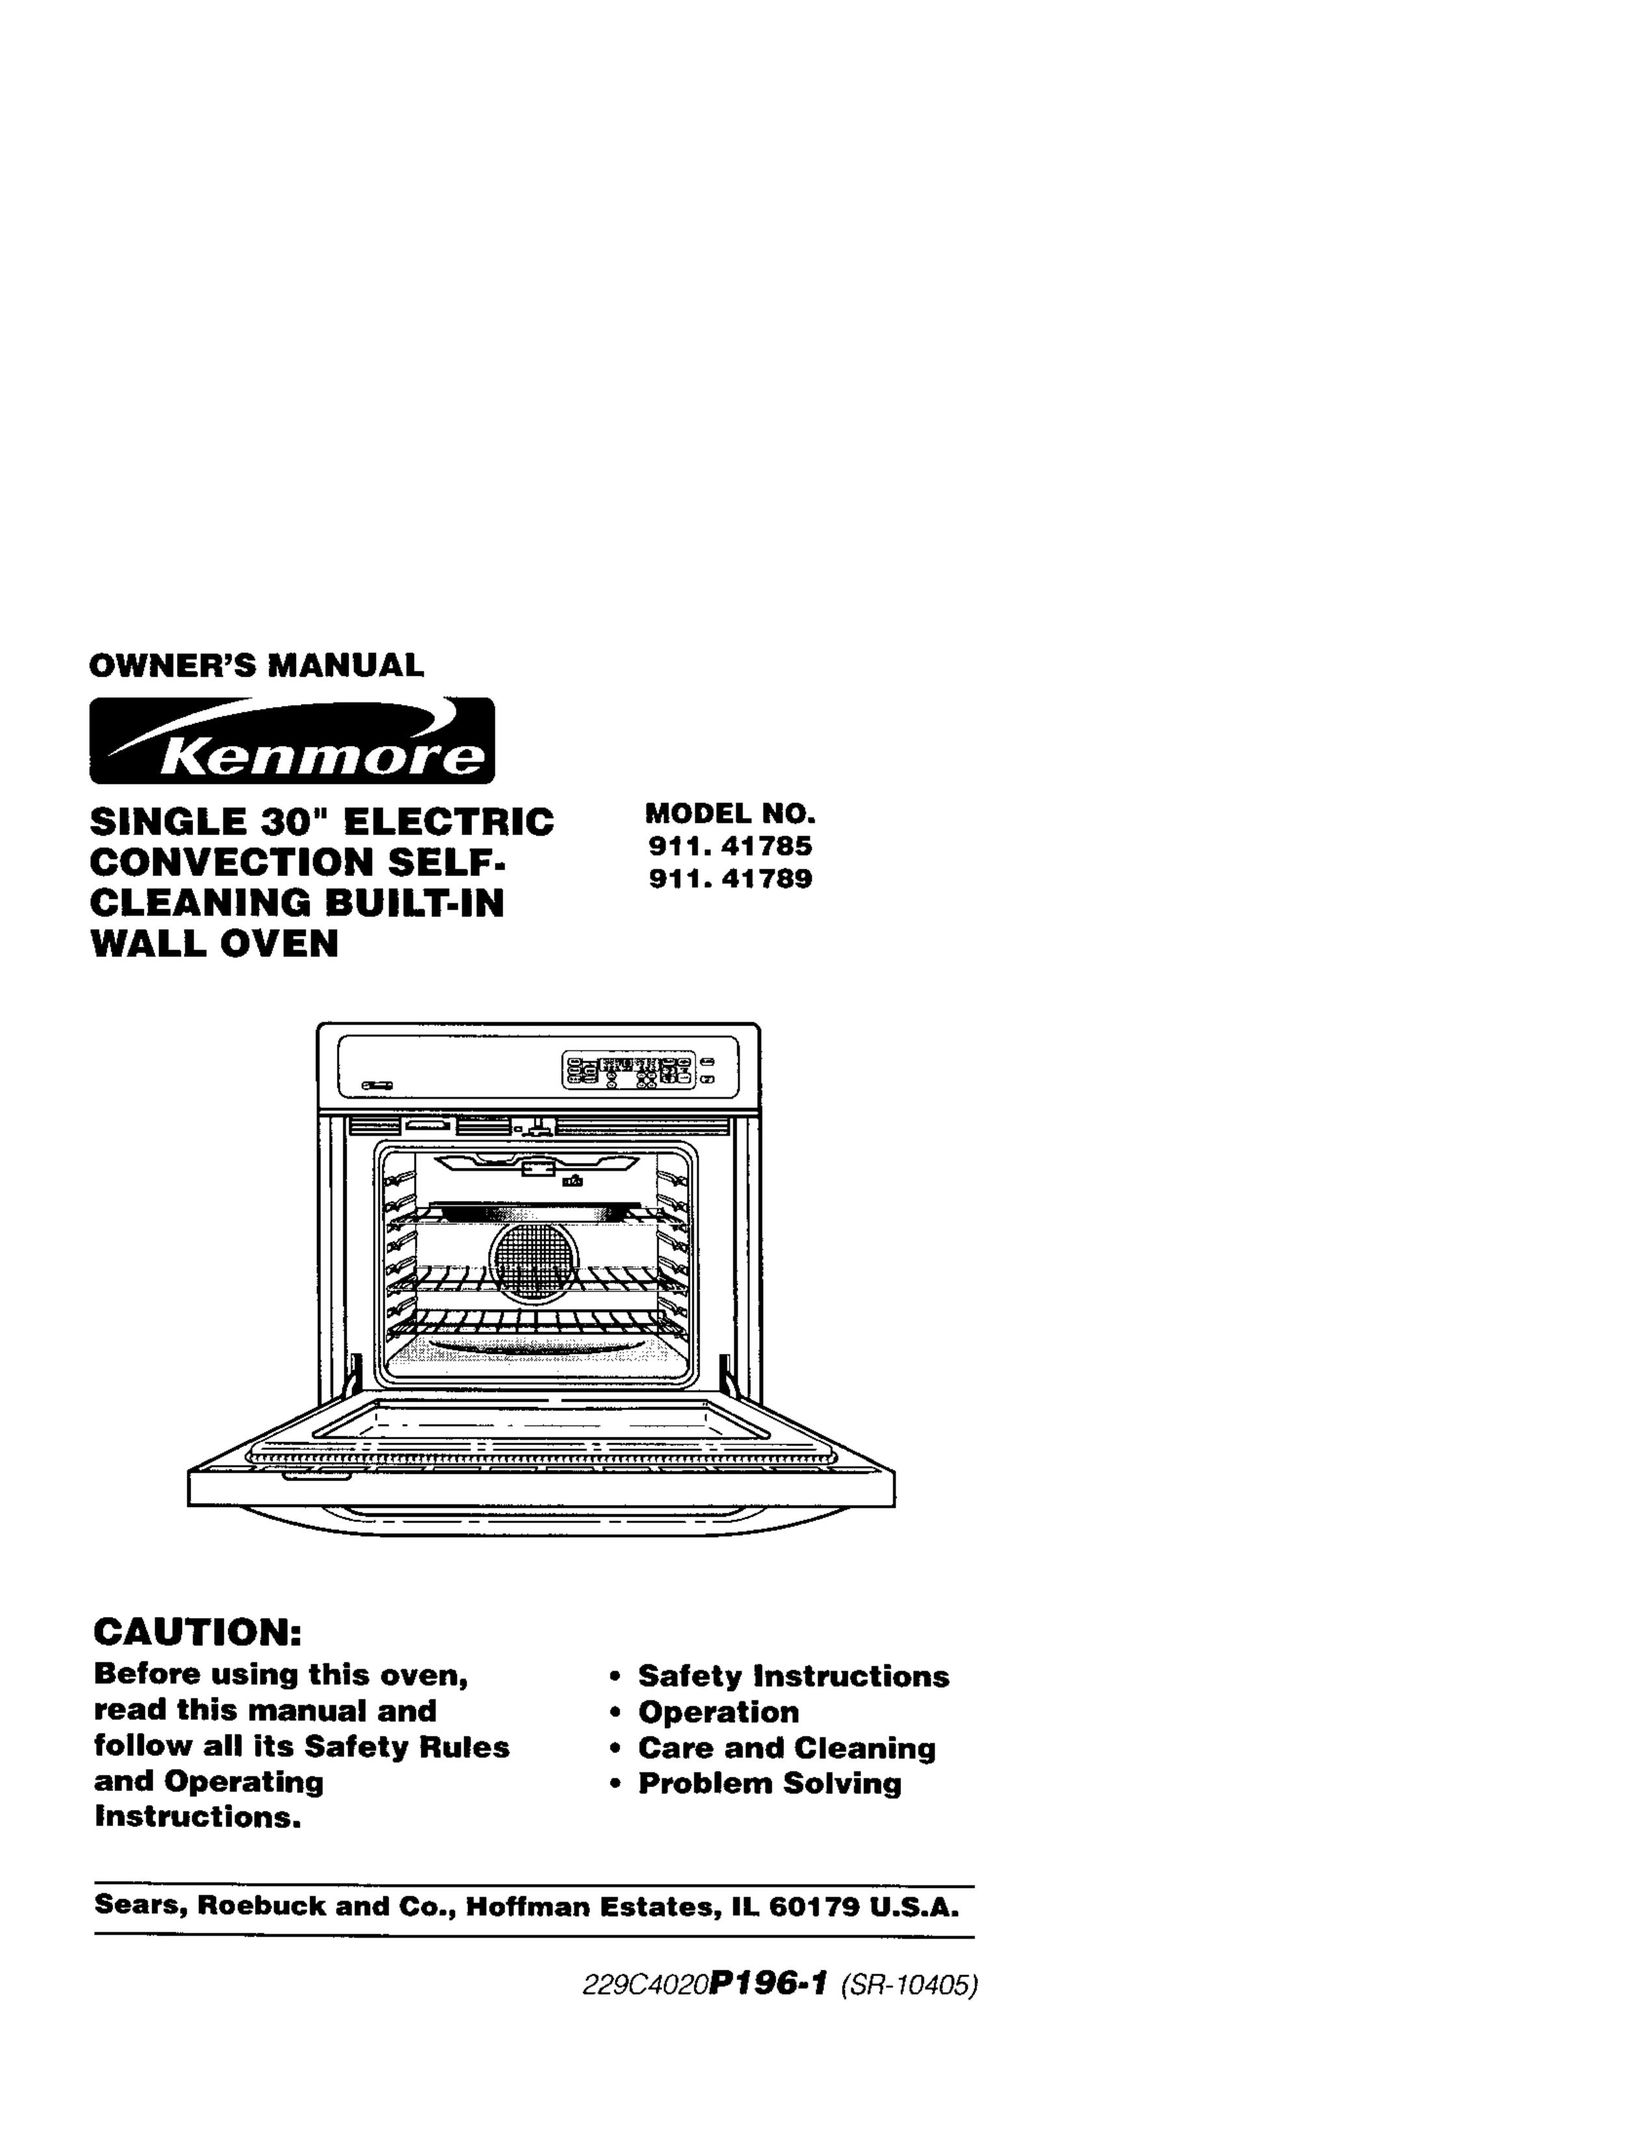 Kenmore 911.41785 Convection Oven User Manual